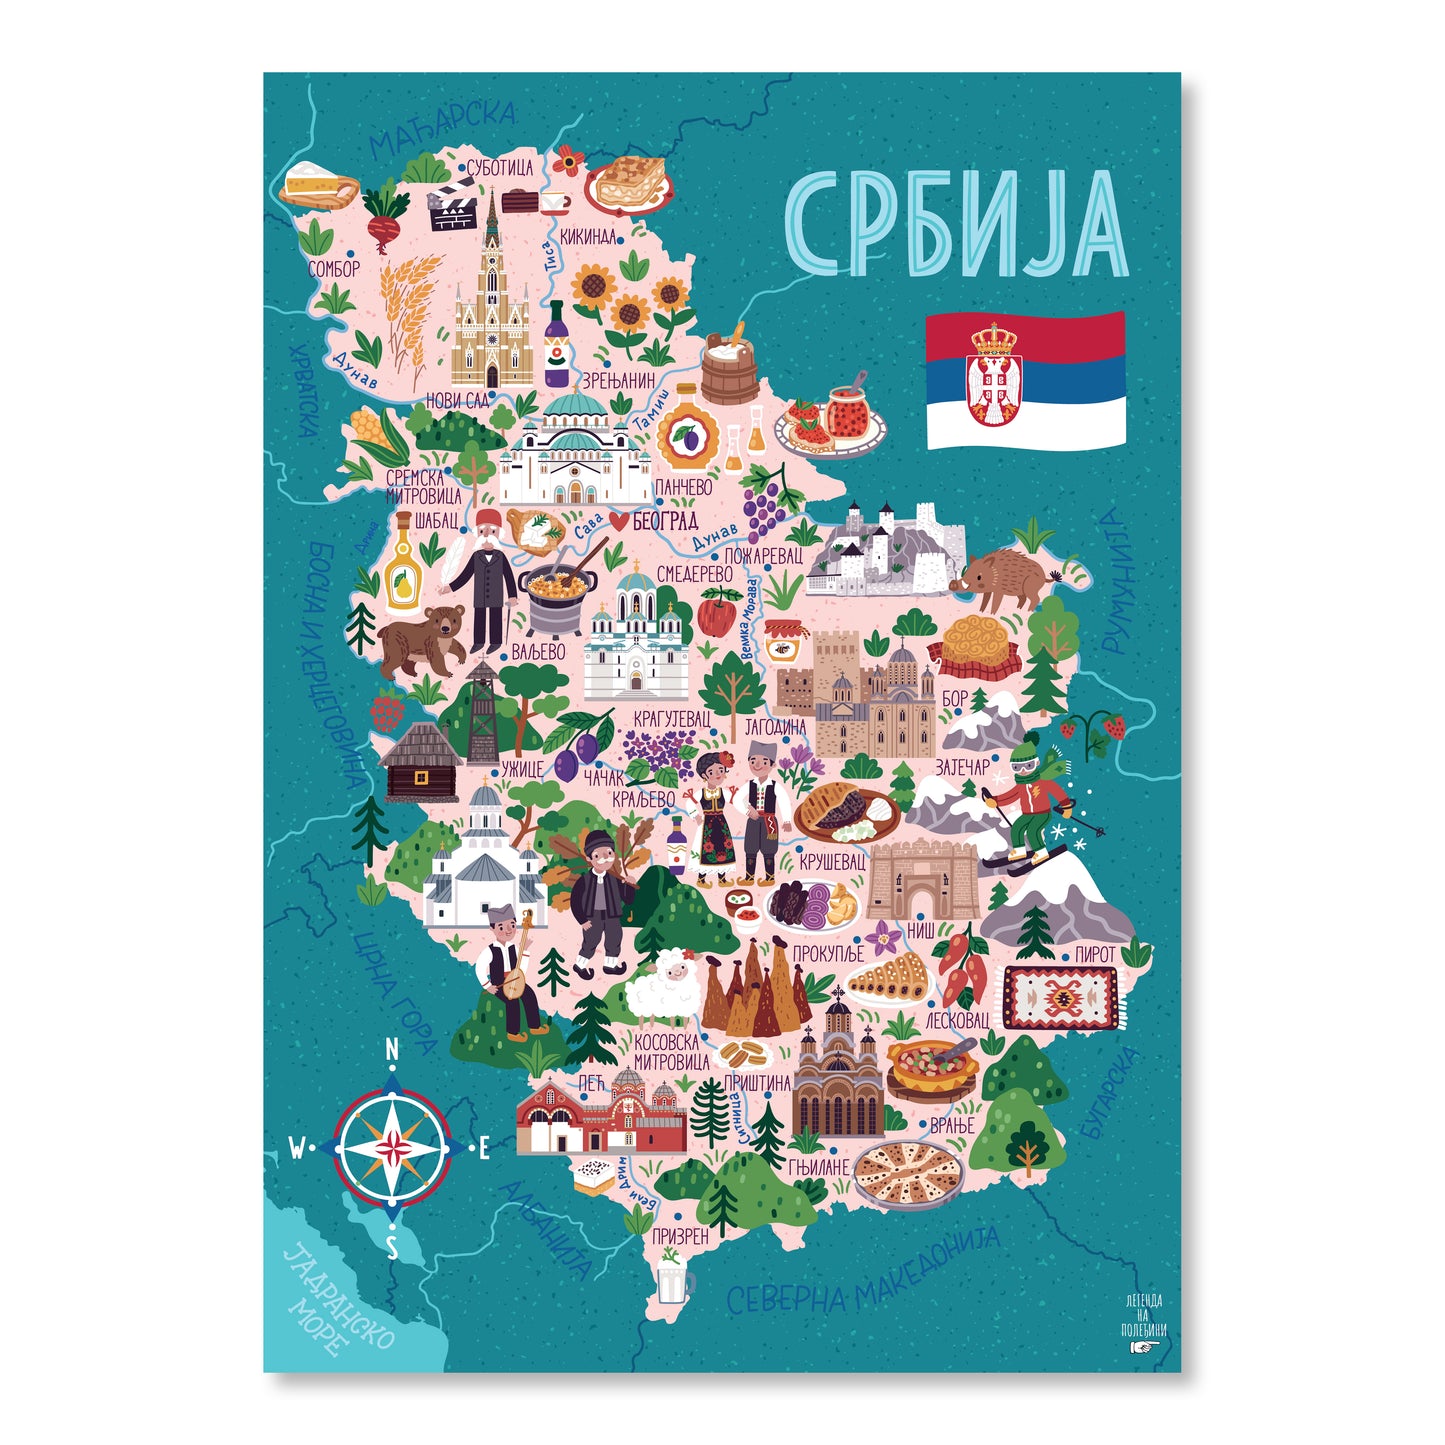 Serbia pictographic scratch off map (cyrilic)